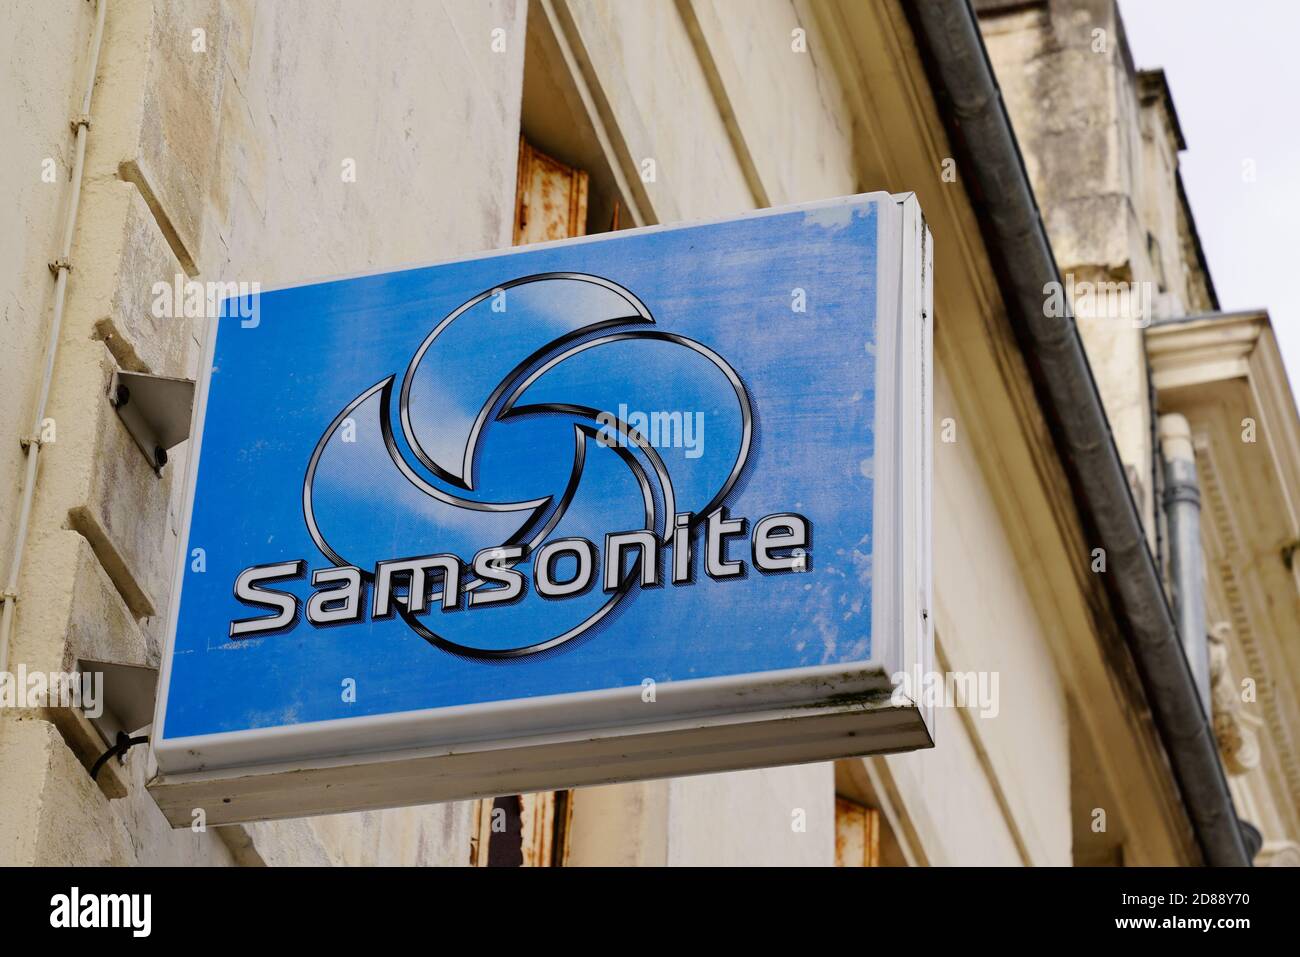 Bordeaux , Aquitaine / France - 16 10 2020 : Samsonite logo and text sign  front of suitcase store of American luggage manufacturer and retailer shop  Stock Photo - Alamy